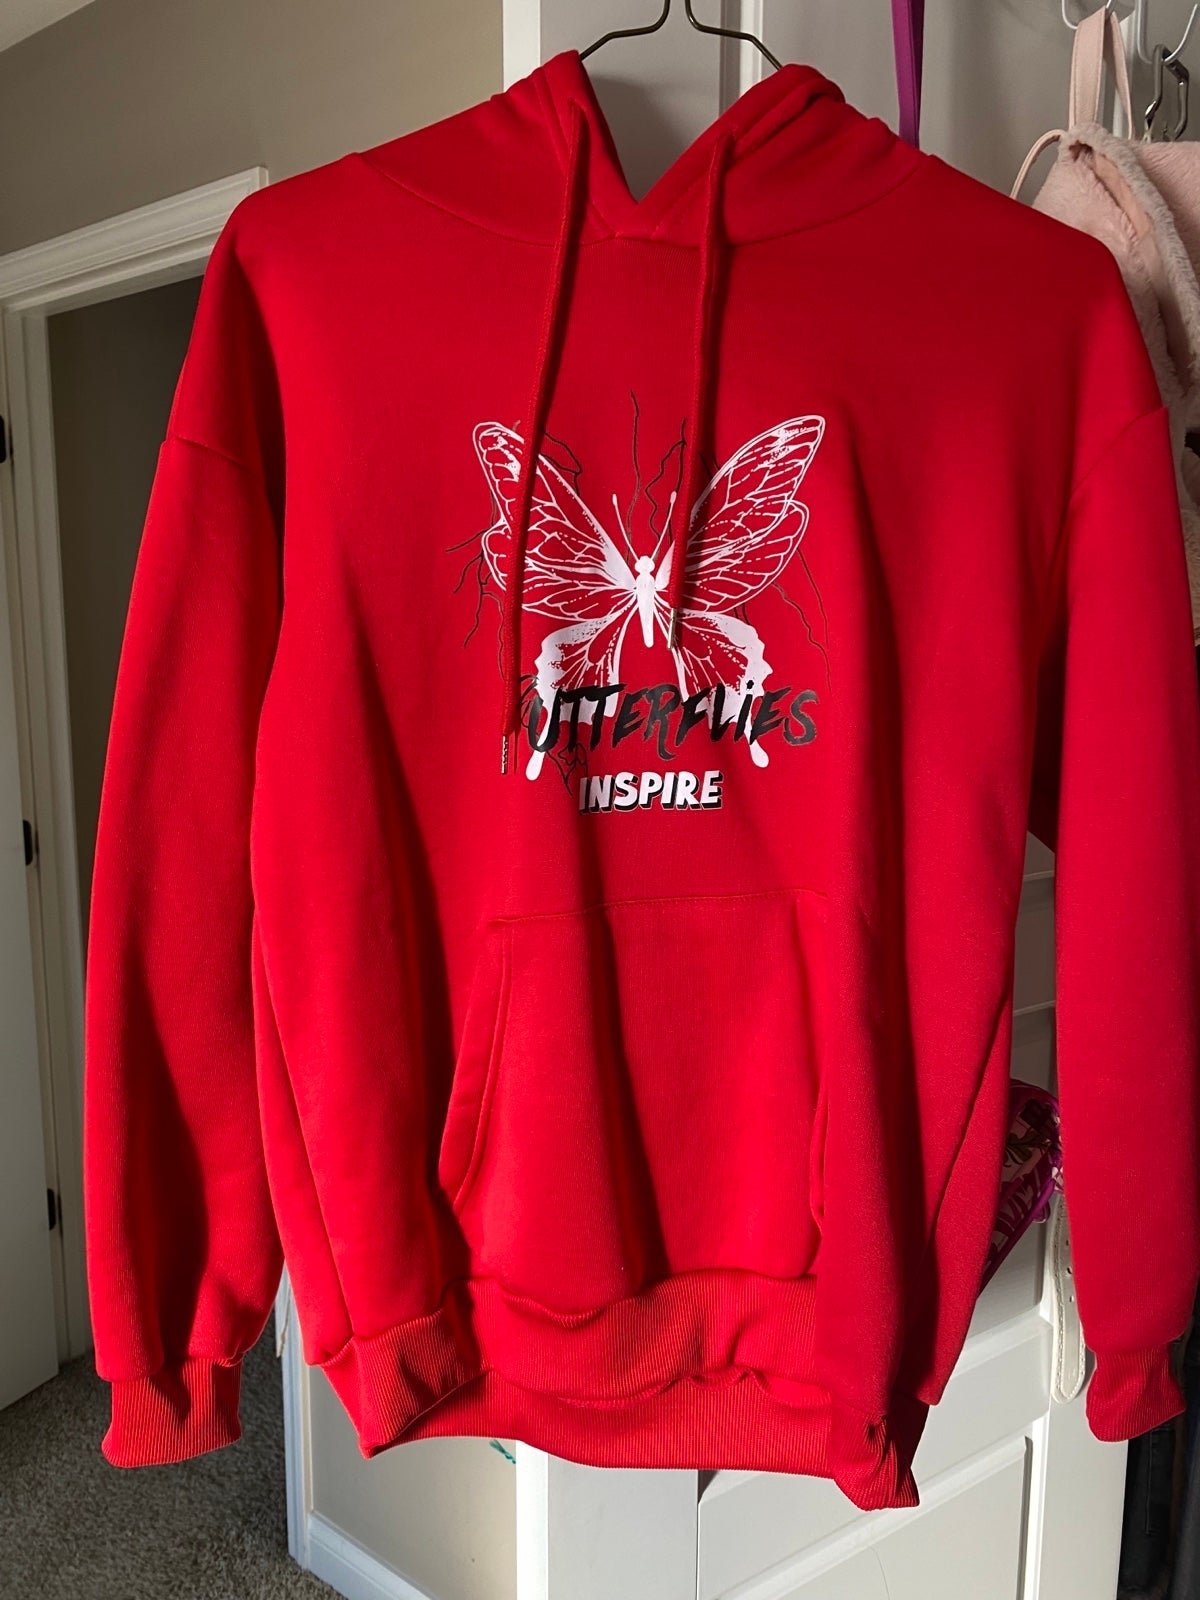 save up to 70% Red hoodie nmDcG1jBB outlet online shop